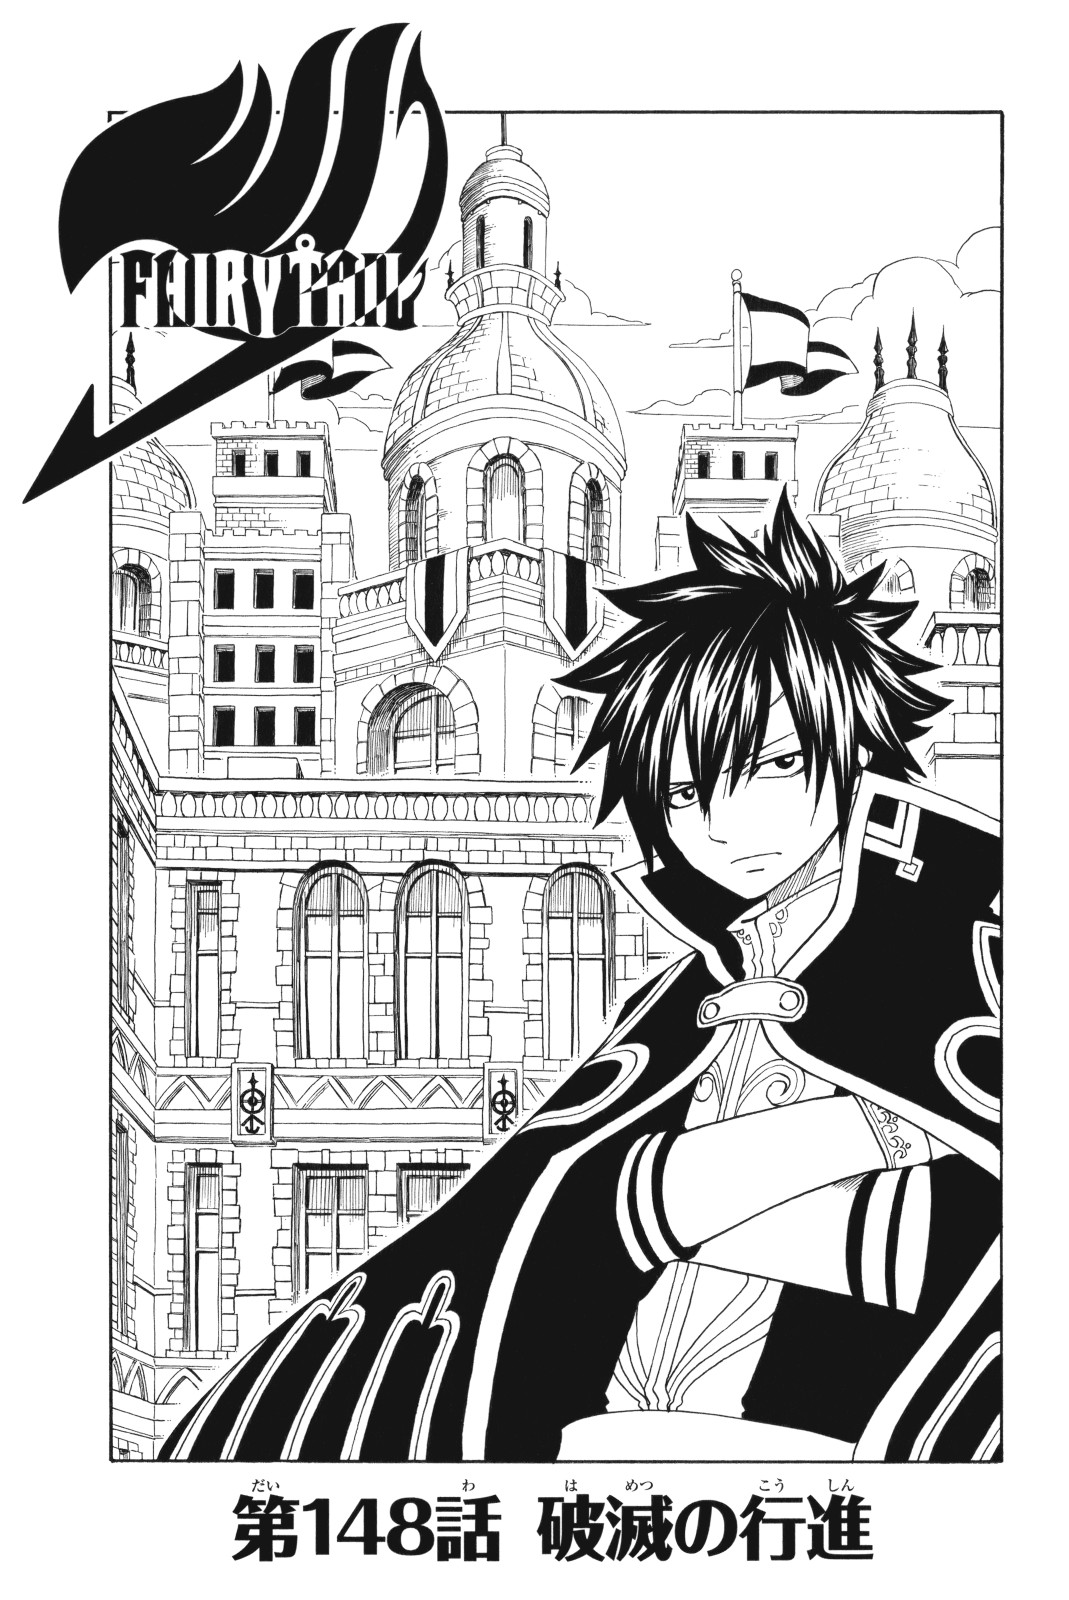 Fairy Tail: 100 Years Quest 148